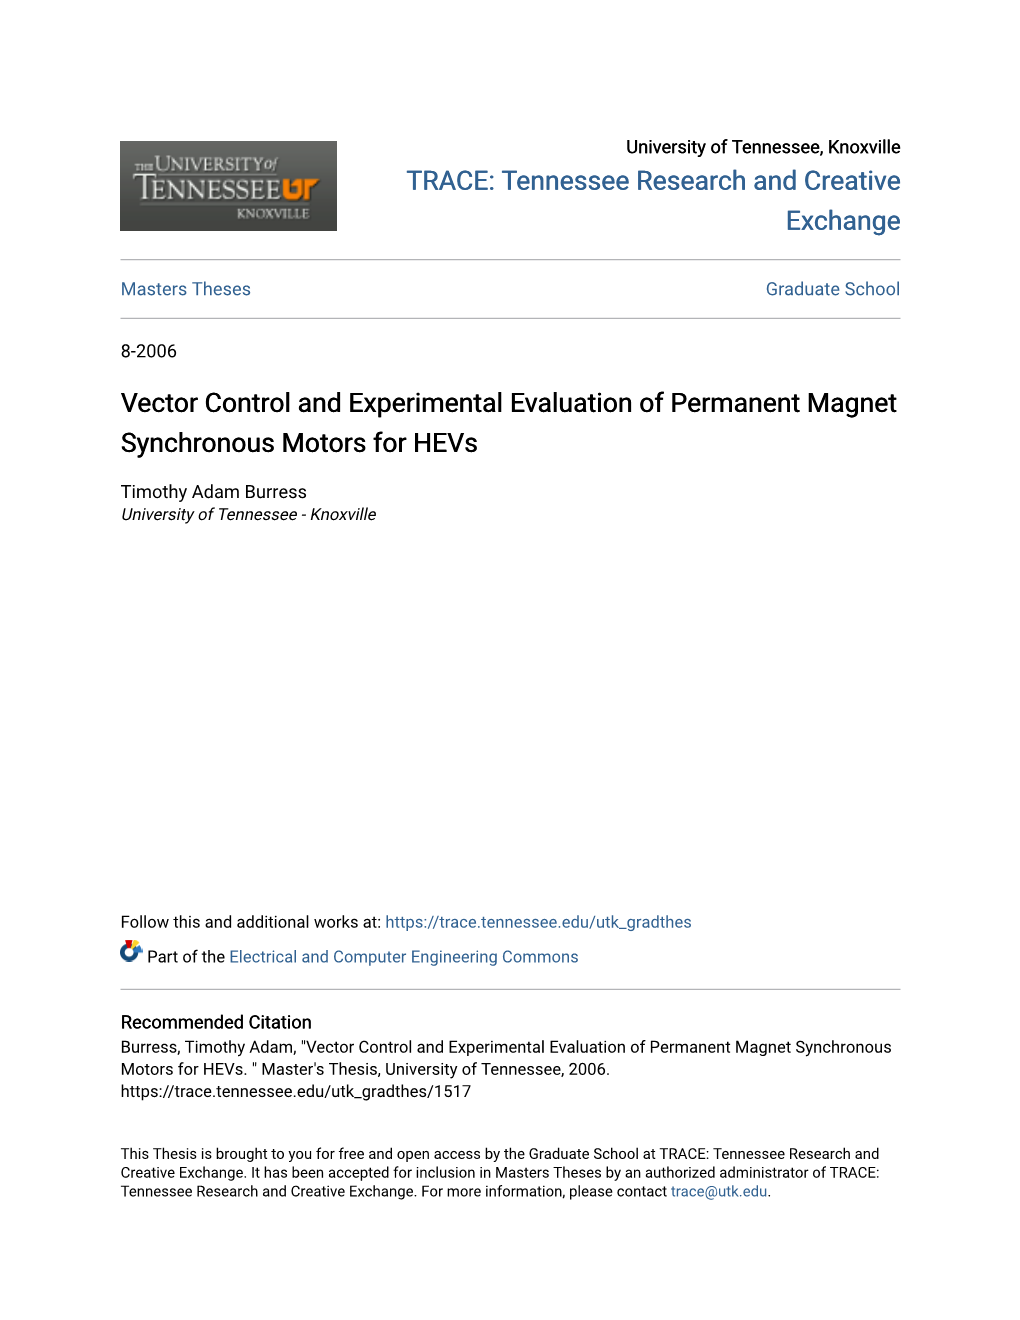 Vector Control and Experimental Evaluation of Permanent Magnet Synchronous Motors for Hevs